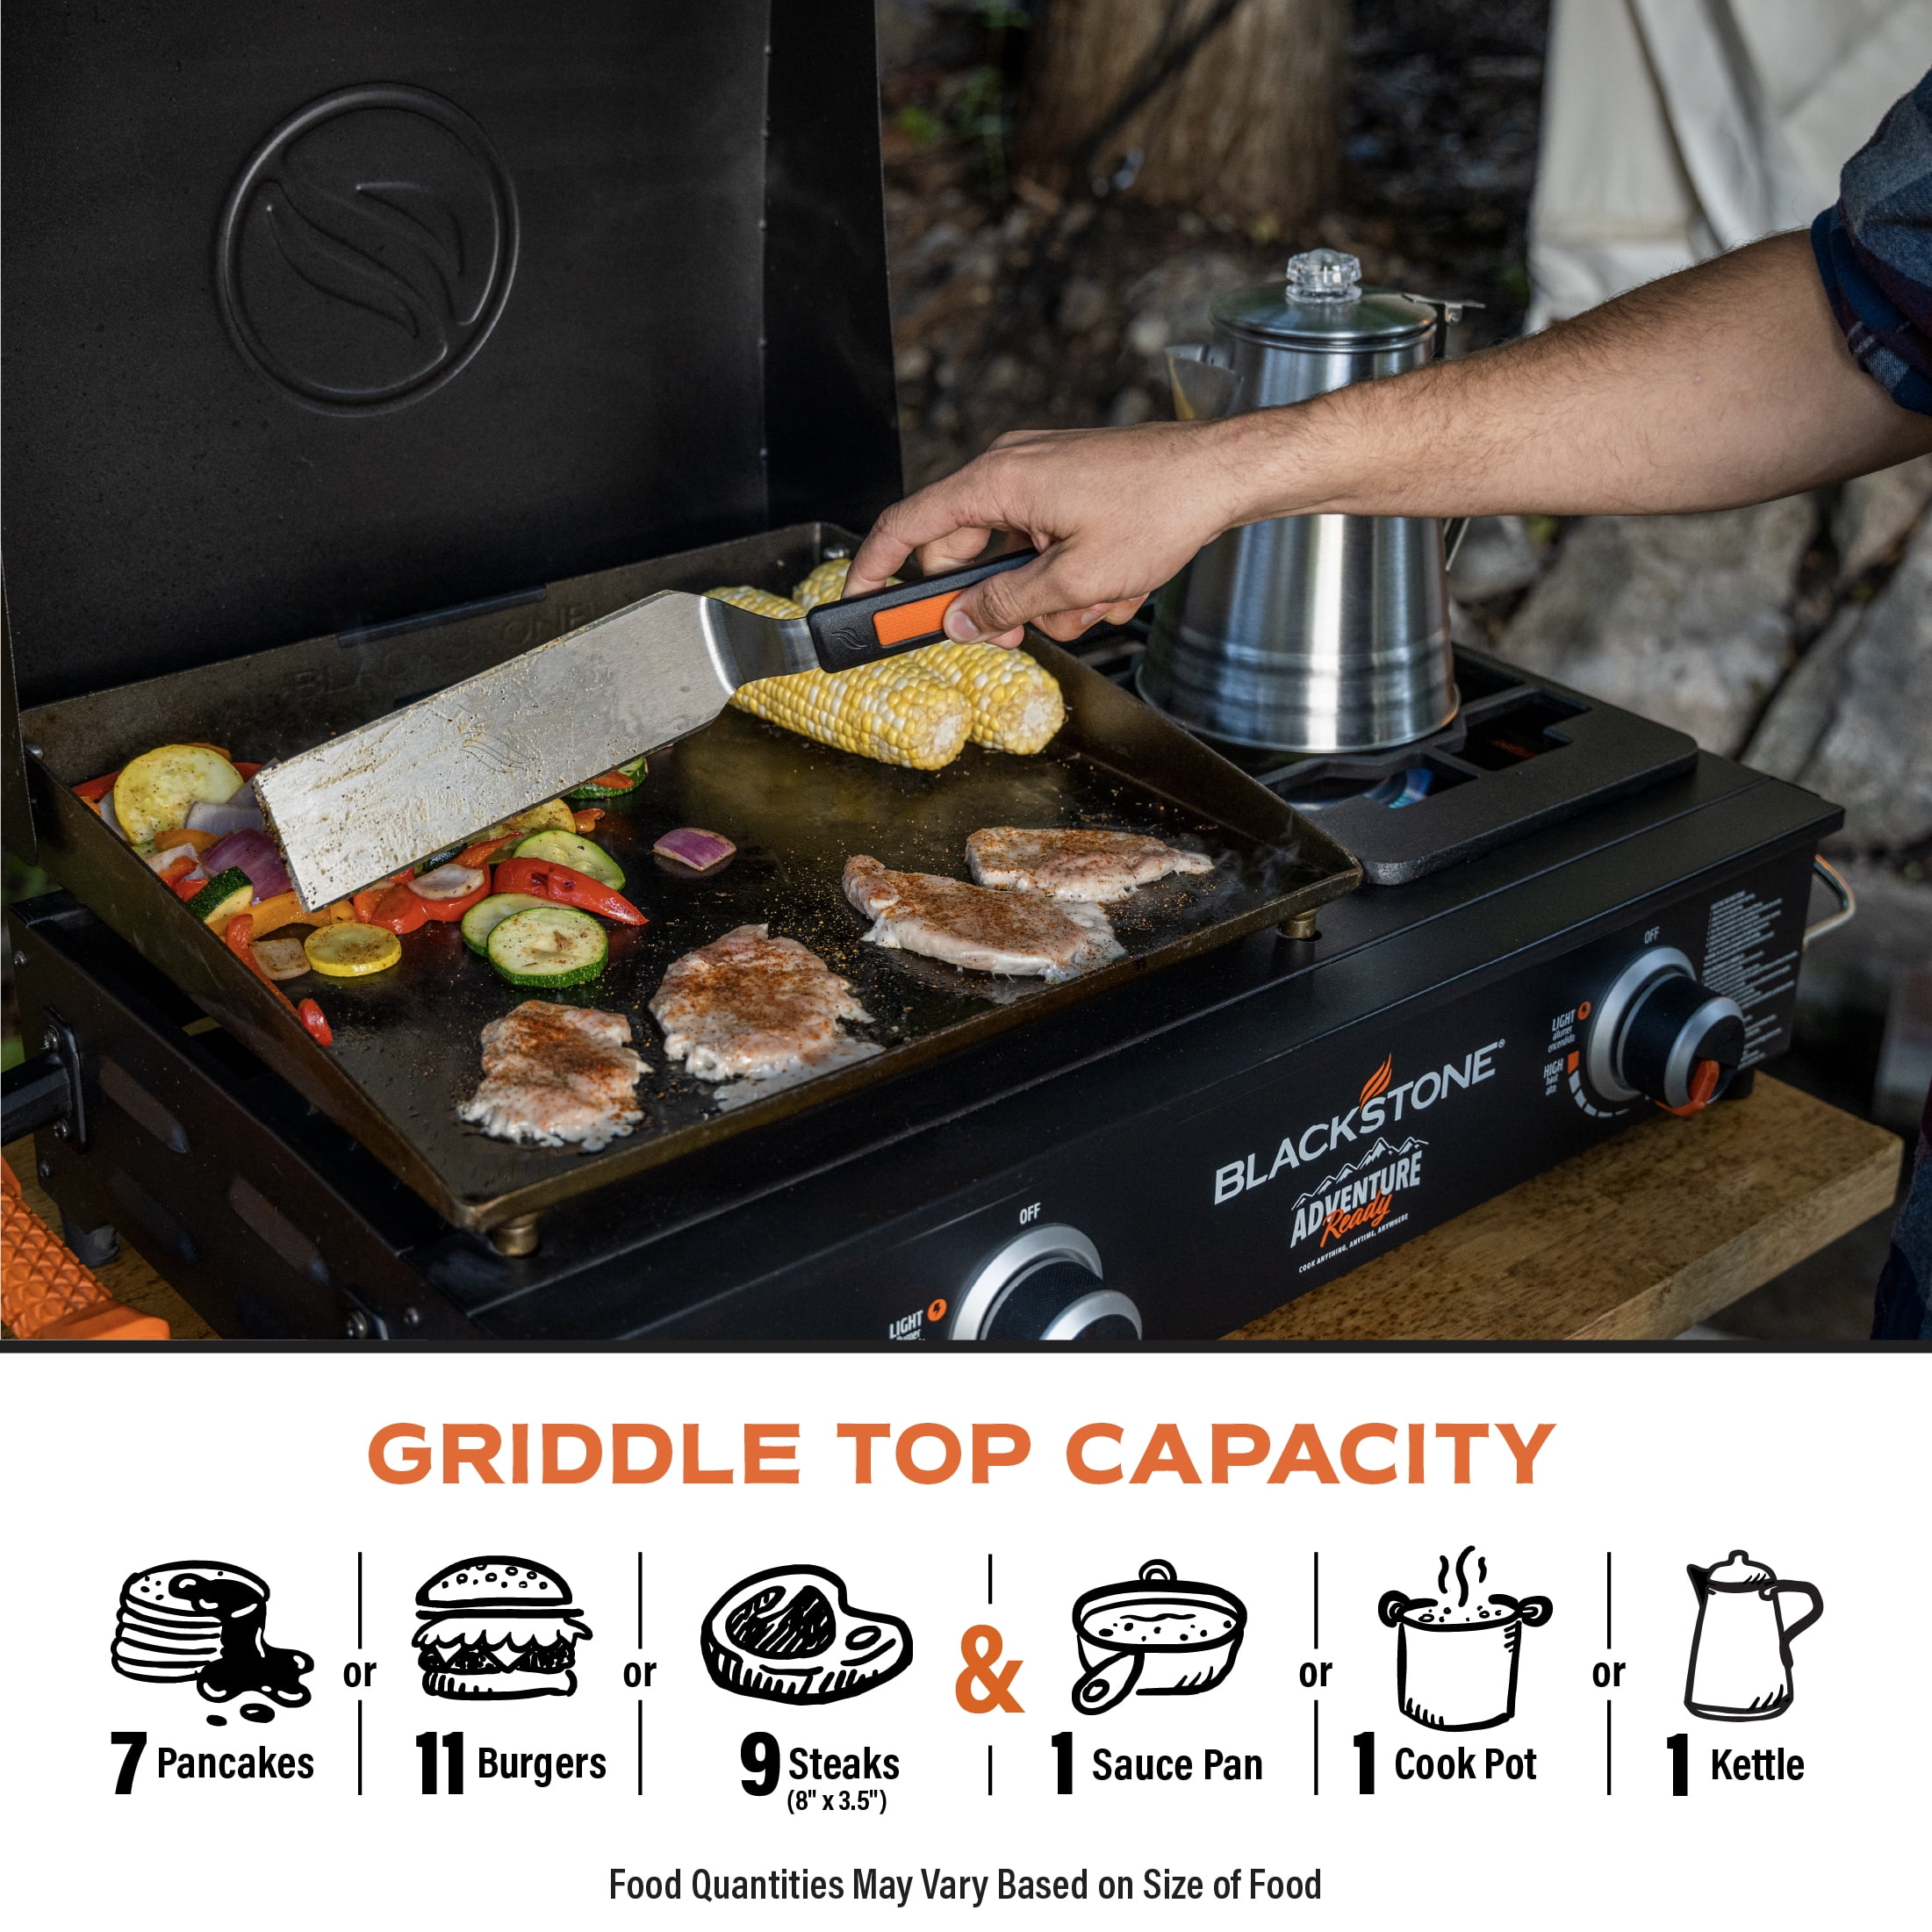 Blackstone's tabletop griddle hits the best price of the year at $126 via